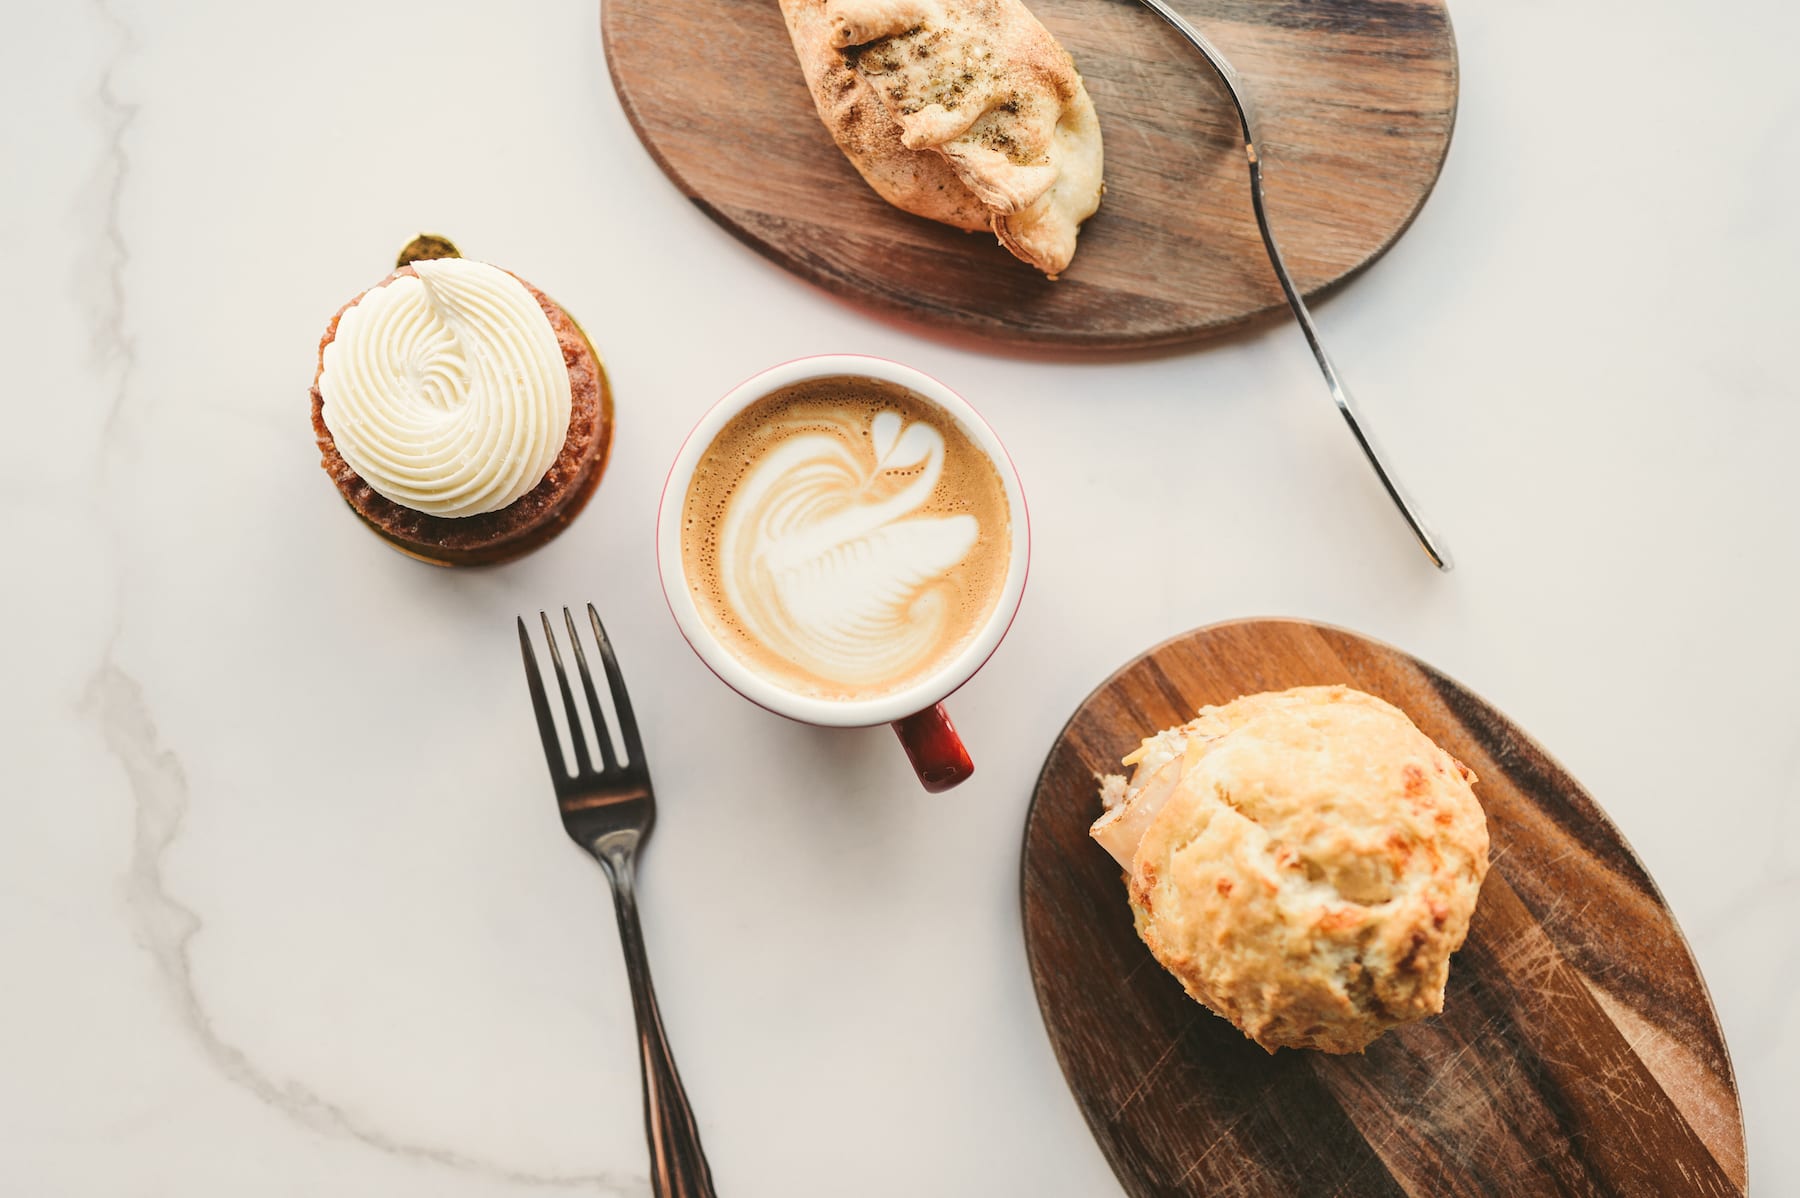 Brew Urban Cafe Spread of pastries on wooden plates, muffin with white frosting and red cup of cappuccino on display on marble table with two forks